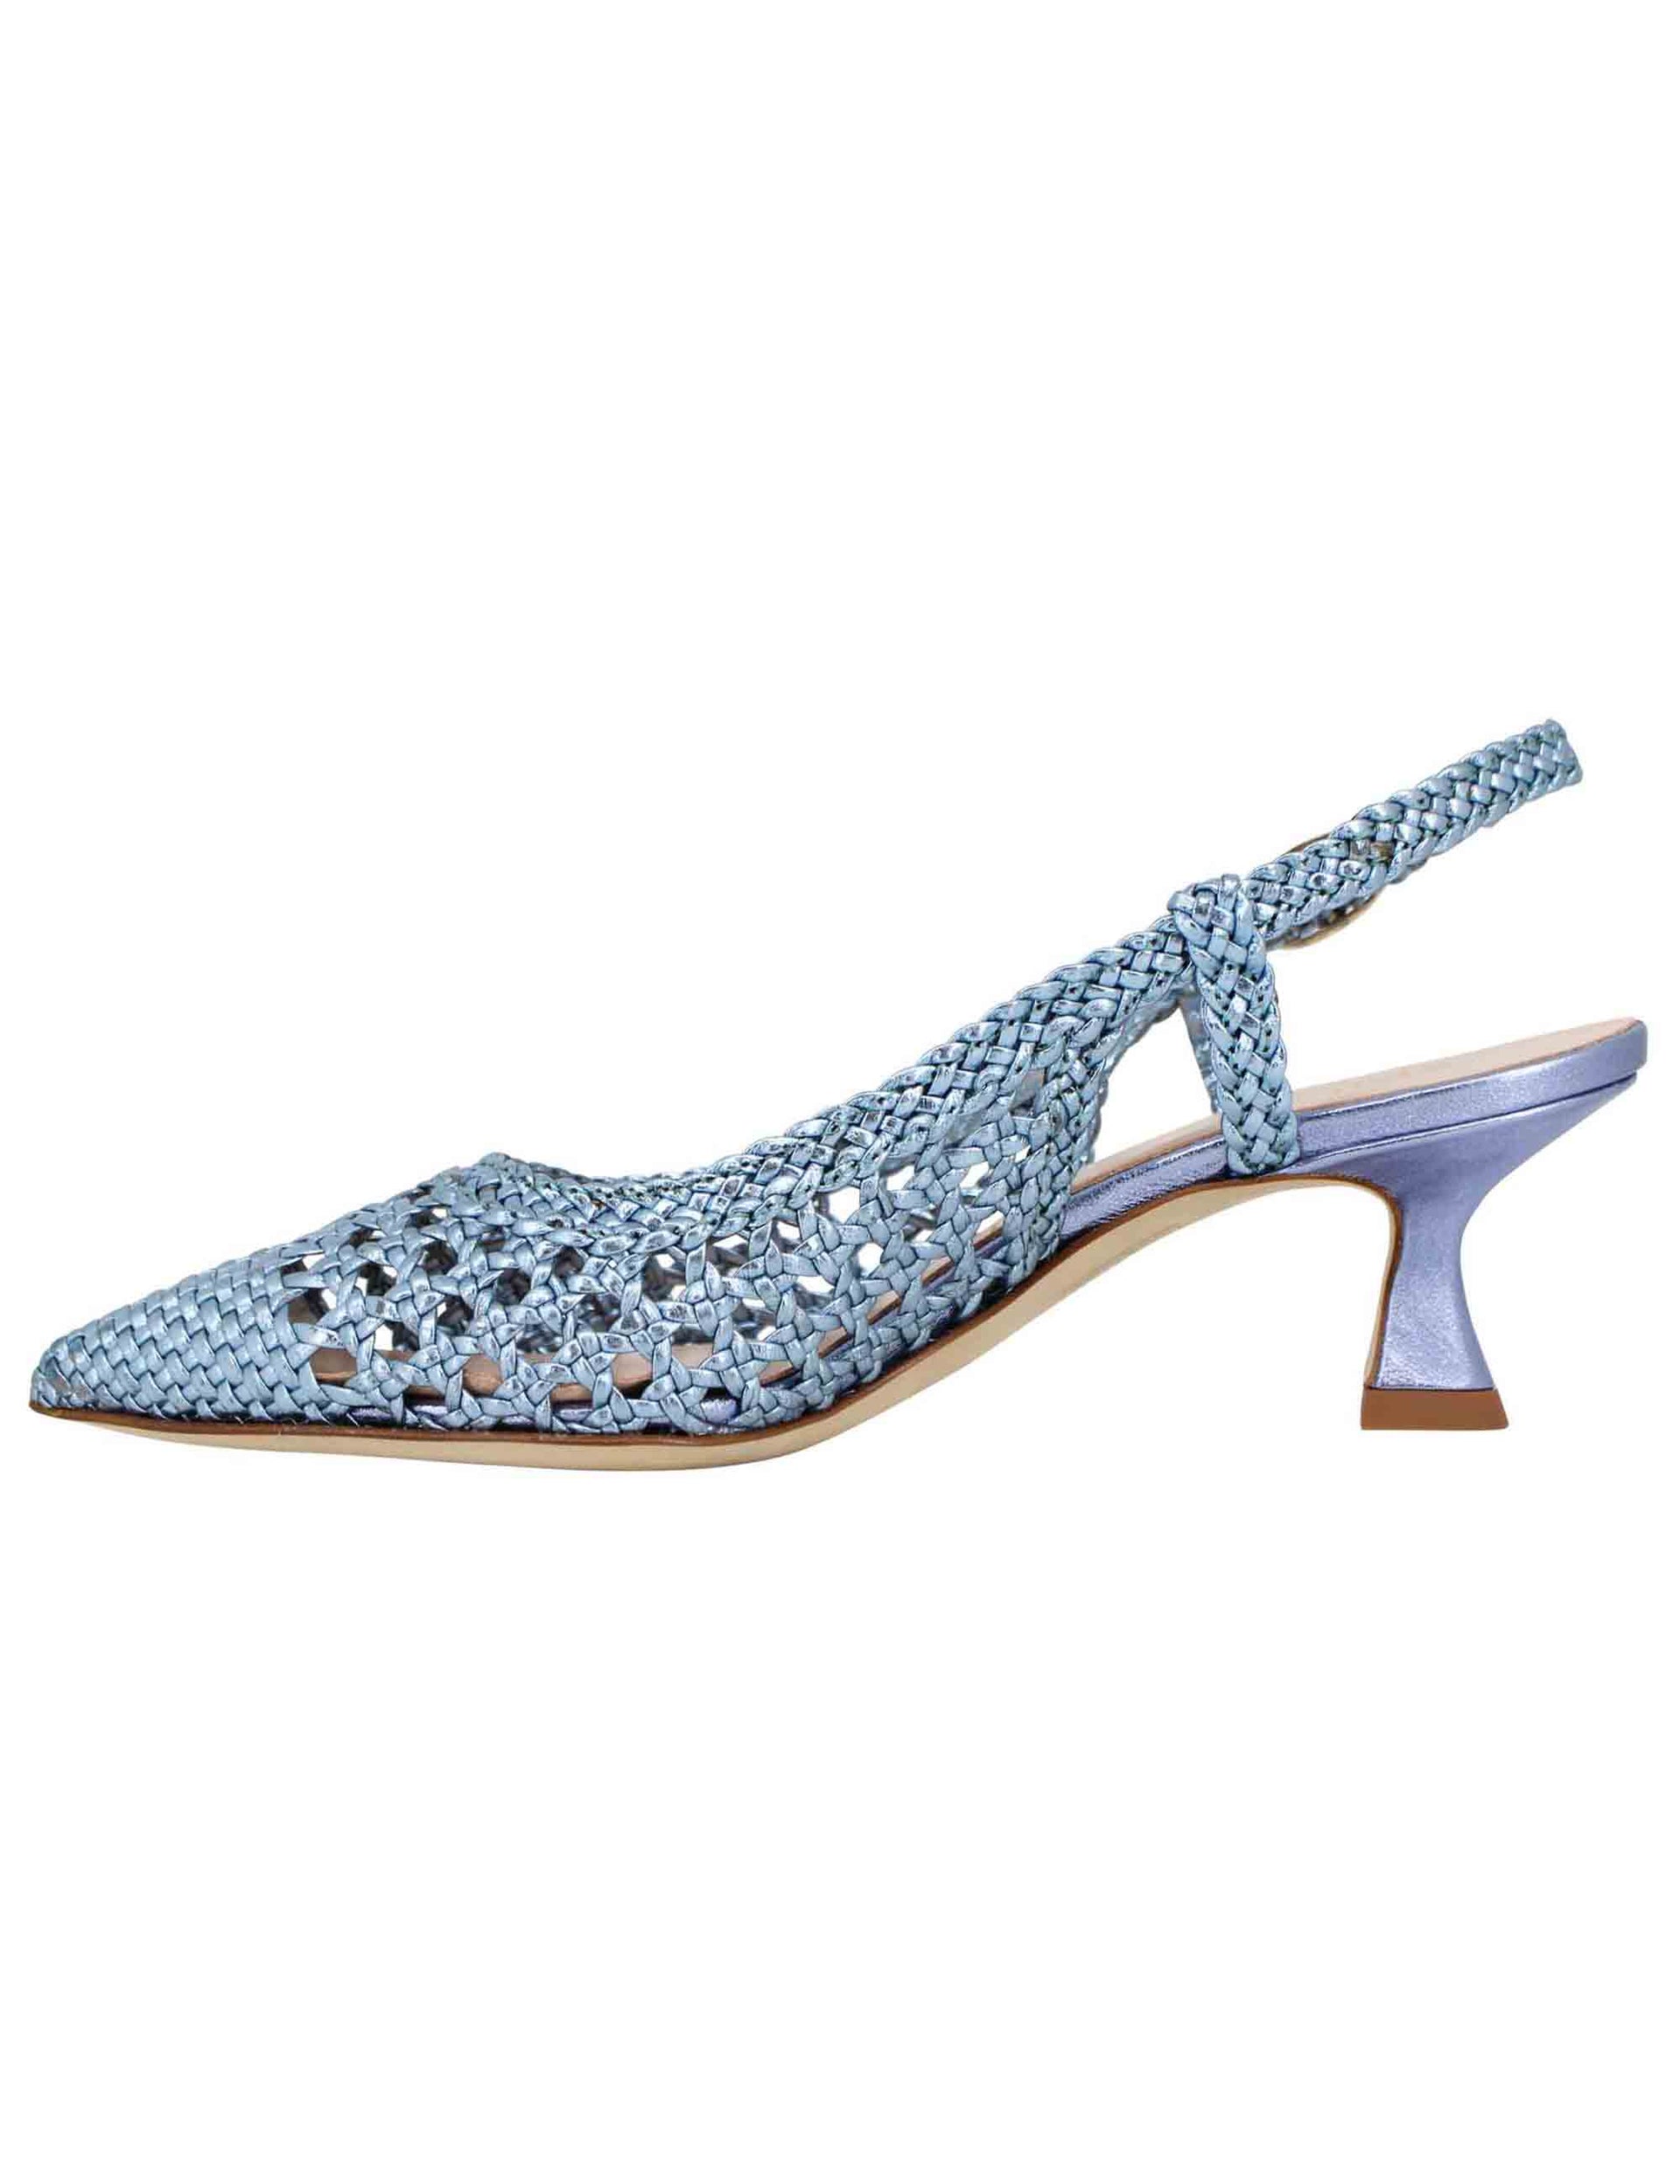 Women's slingback pumps in light blue laminated woven leather with matching heel